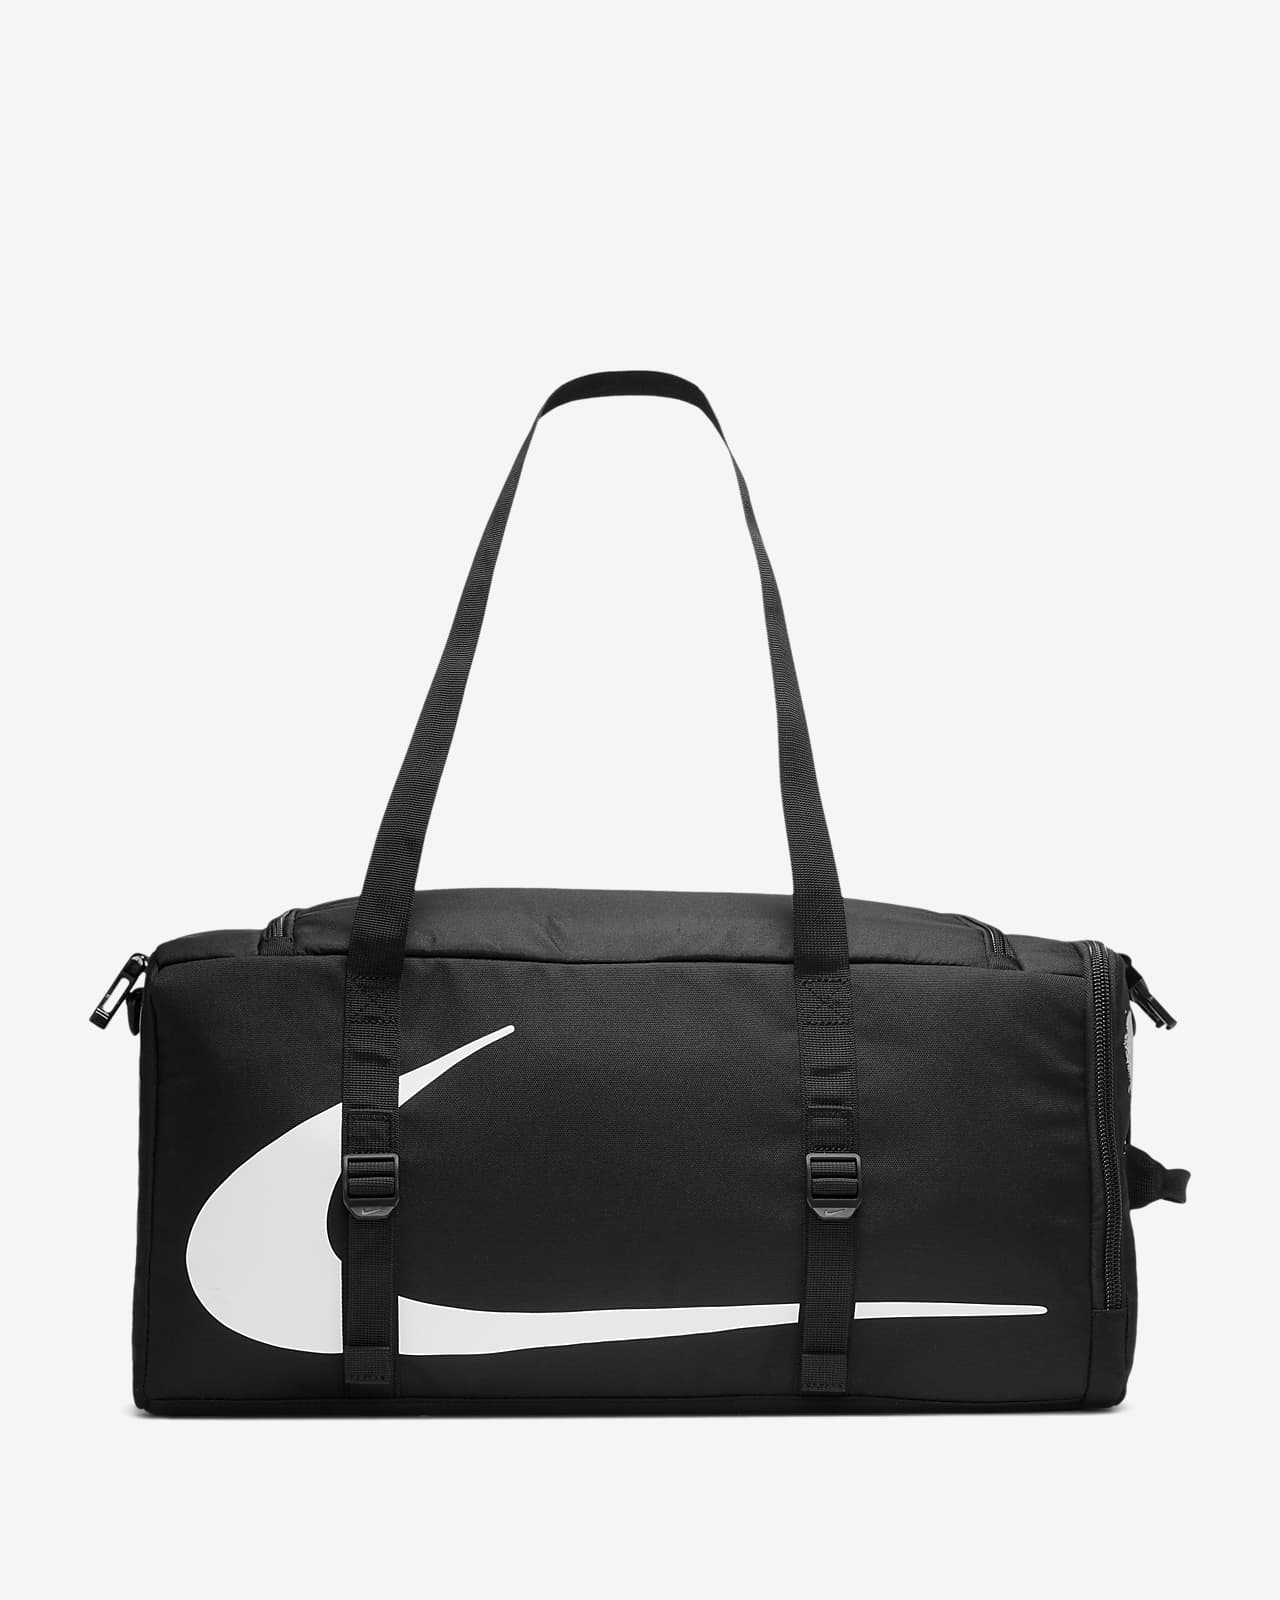 nike off white tote bag,Limited Time 